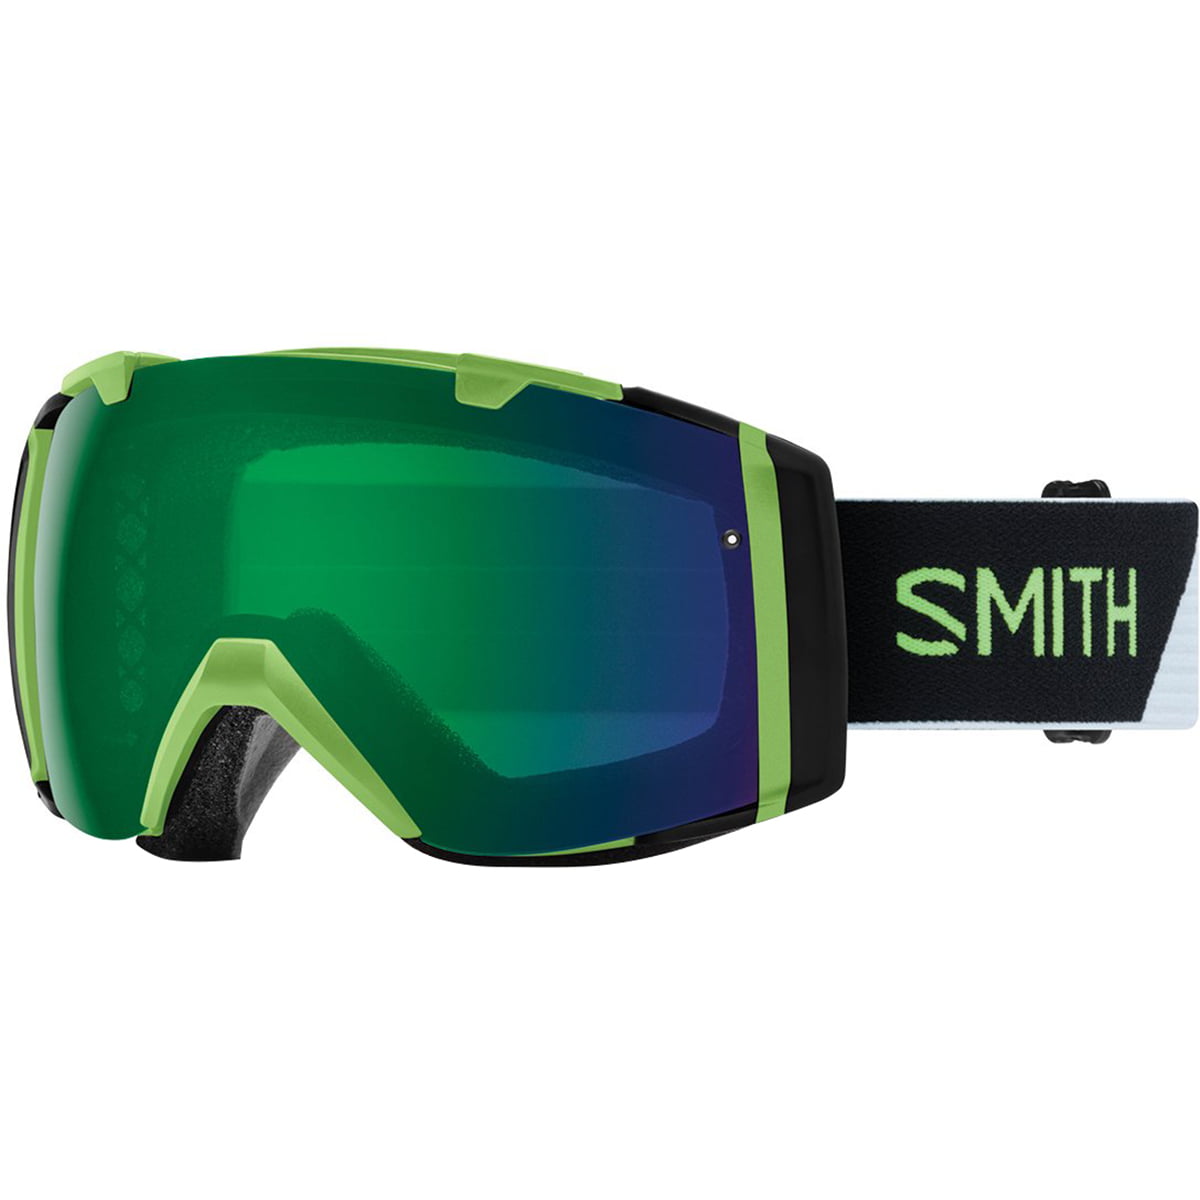 Smith Optics Adult I/O Asian Fit Snowmobile Goggles - Reactor 